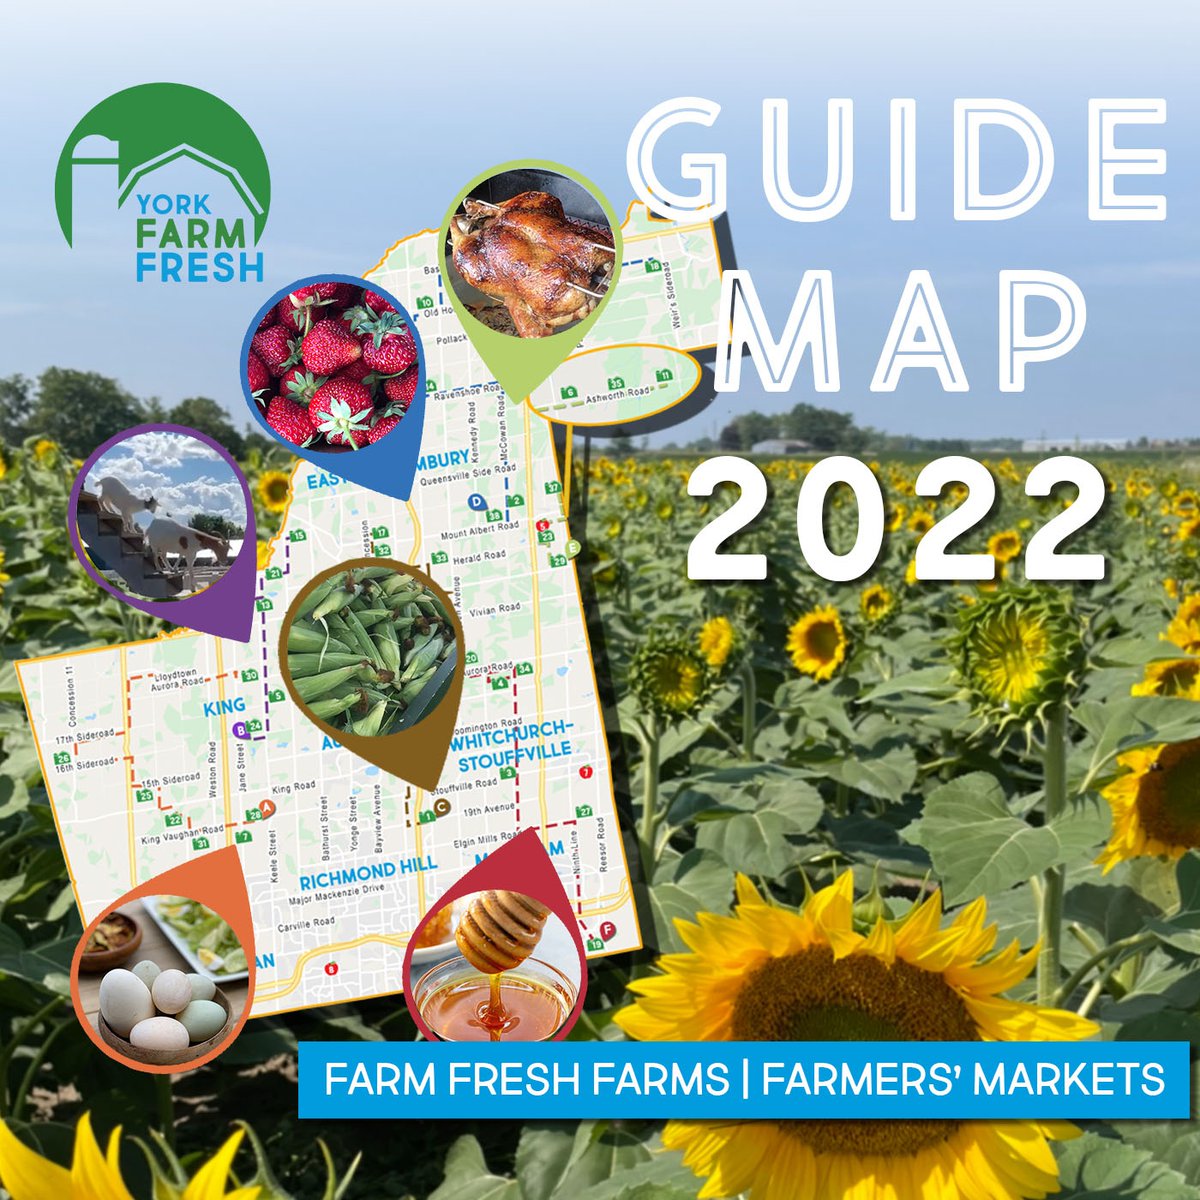 Happy Local Food Week!  Where we celebrate our farmers and the fresh, healthy food they produce.  Our 2022 Guide Map has begun circulating in the region and can be found virtually on our website or YFF mobile app.

#localfoodweek #farmersfeedcities